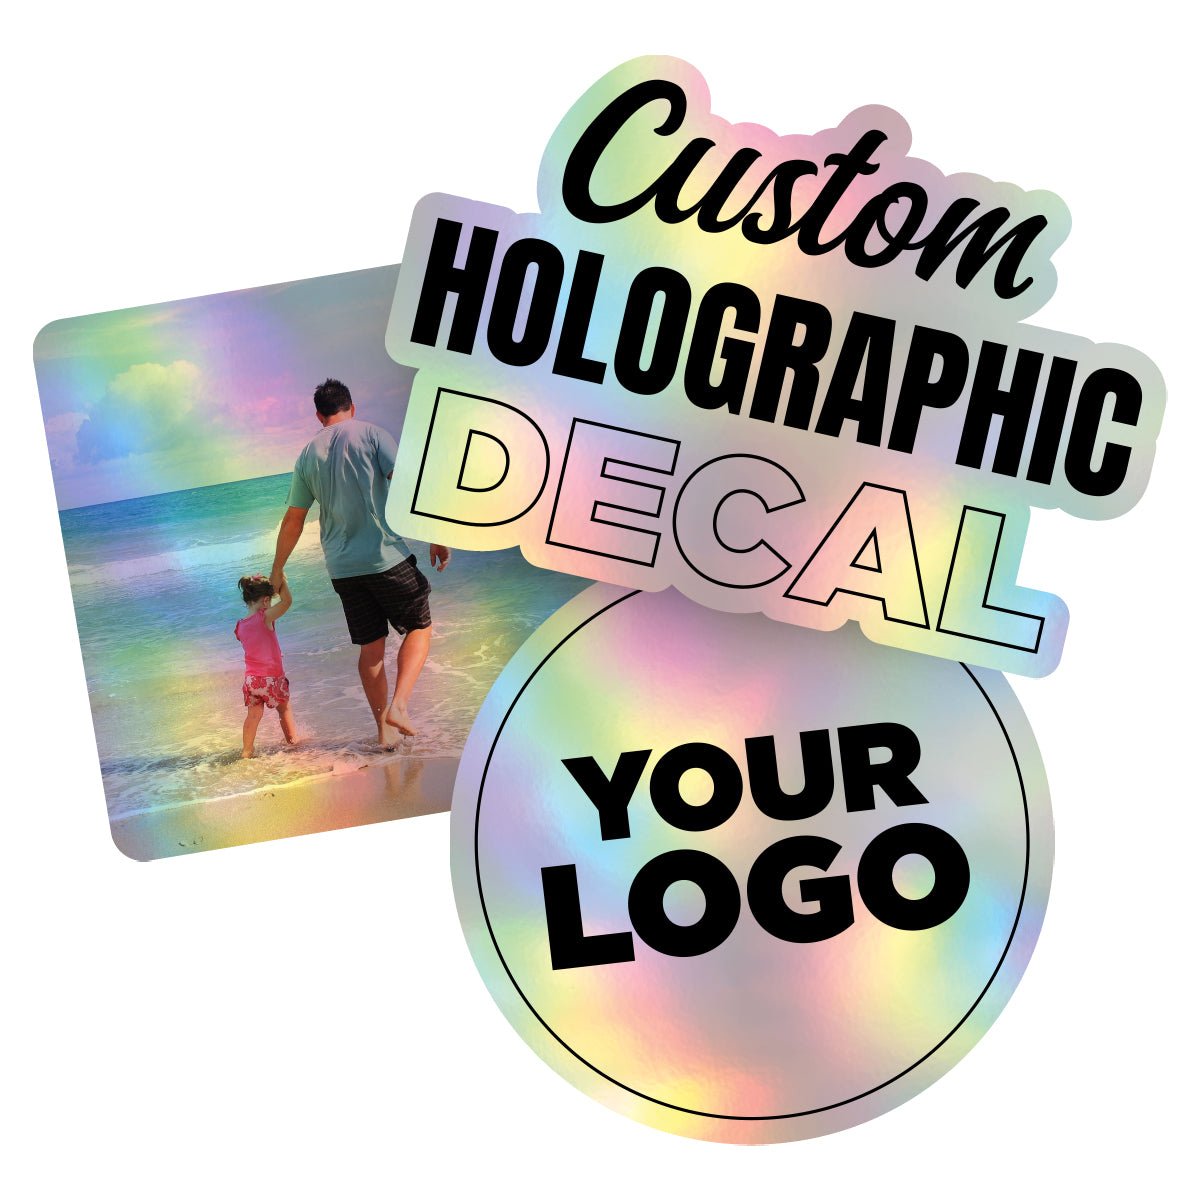 Personalized Holographic Vinyl Sticker Decal Custom Made Any Logo, Image, Text, Or Name Die Cut To Shape - 50 Pack, 4 Inch, Circle